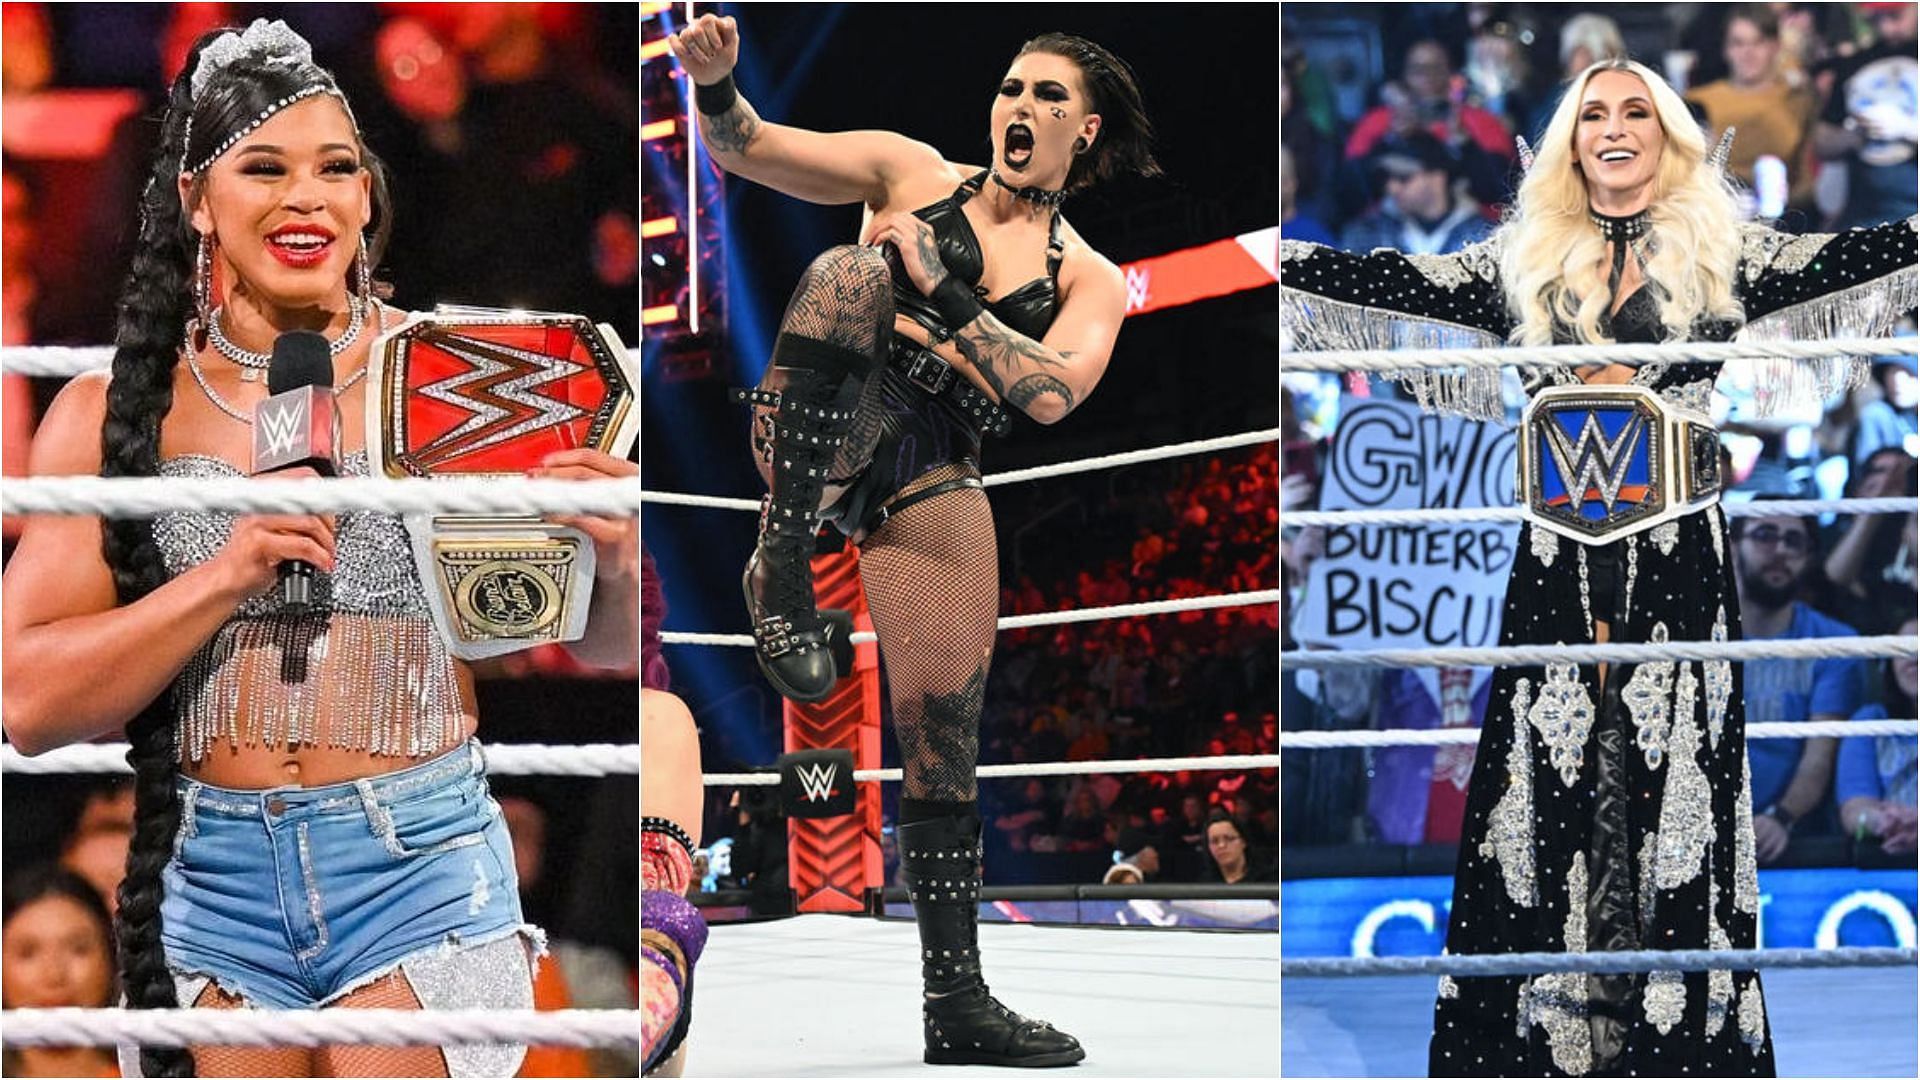 Who will the dominant heel choose to face at WrestleMania 39?